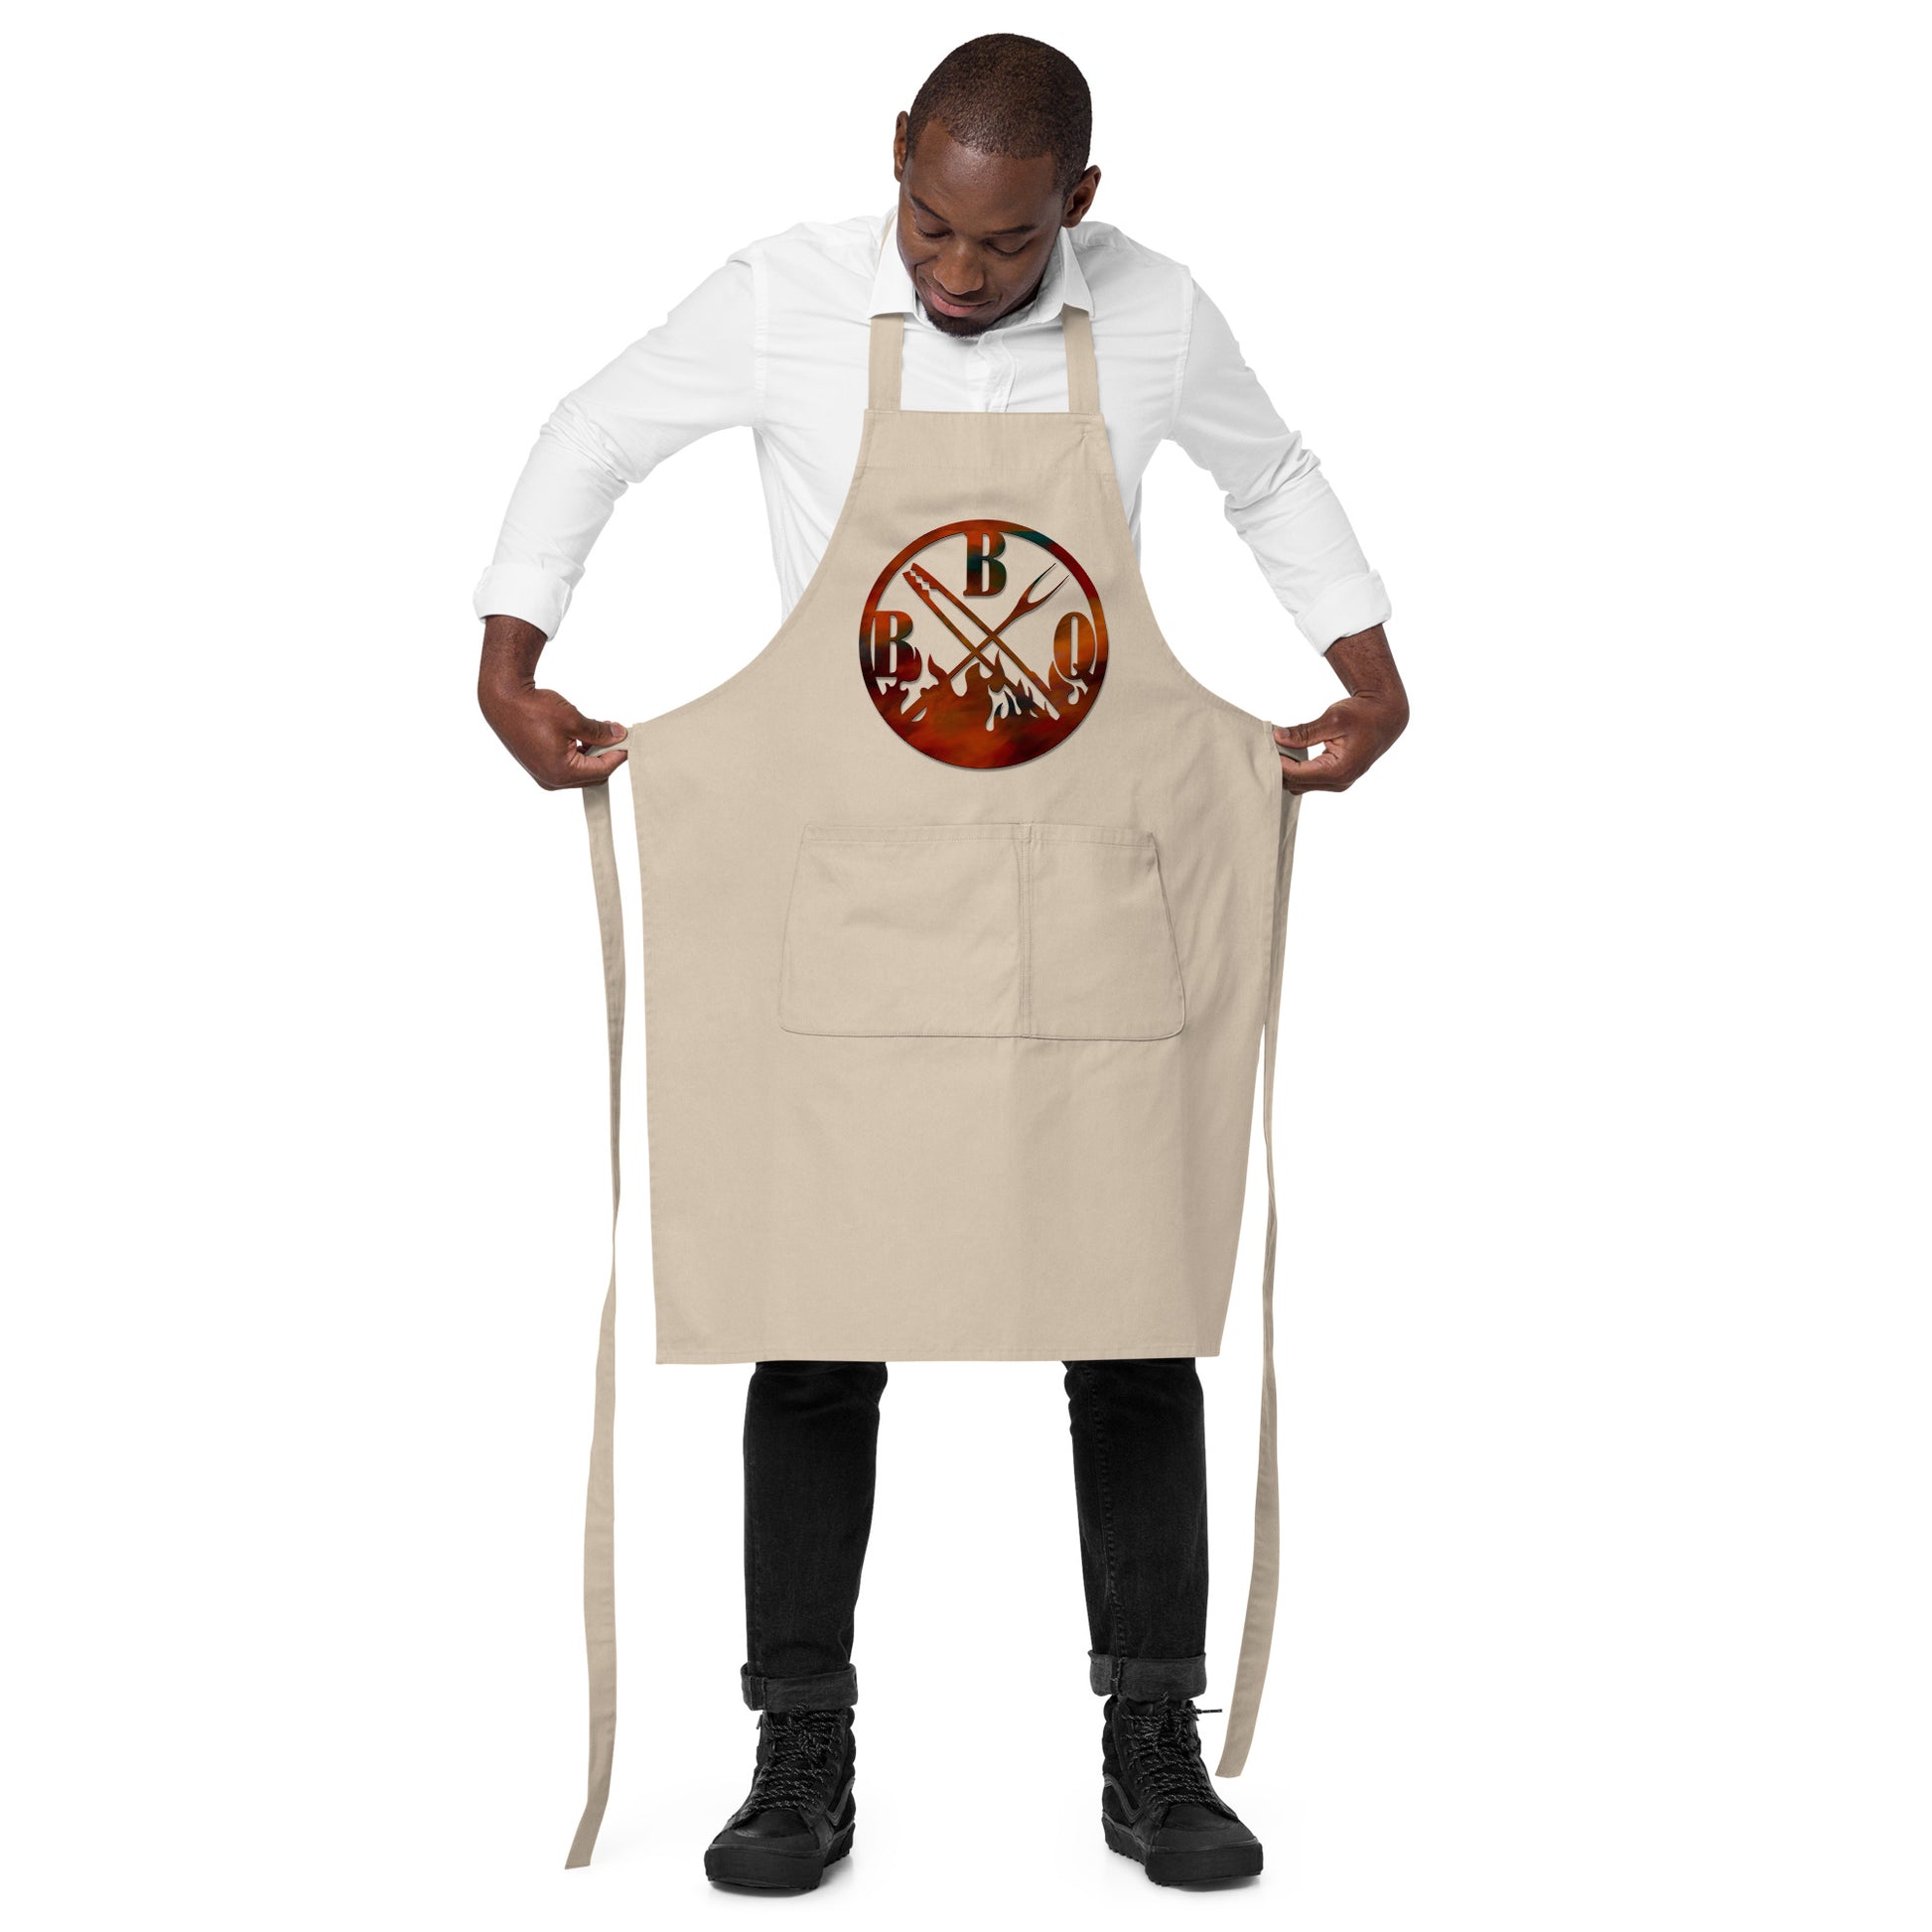 rope apron with meat fork and text "BBQ"